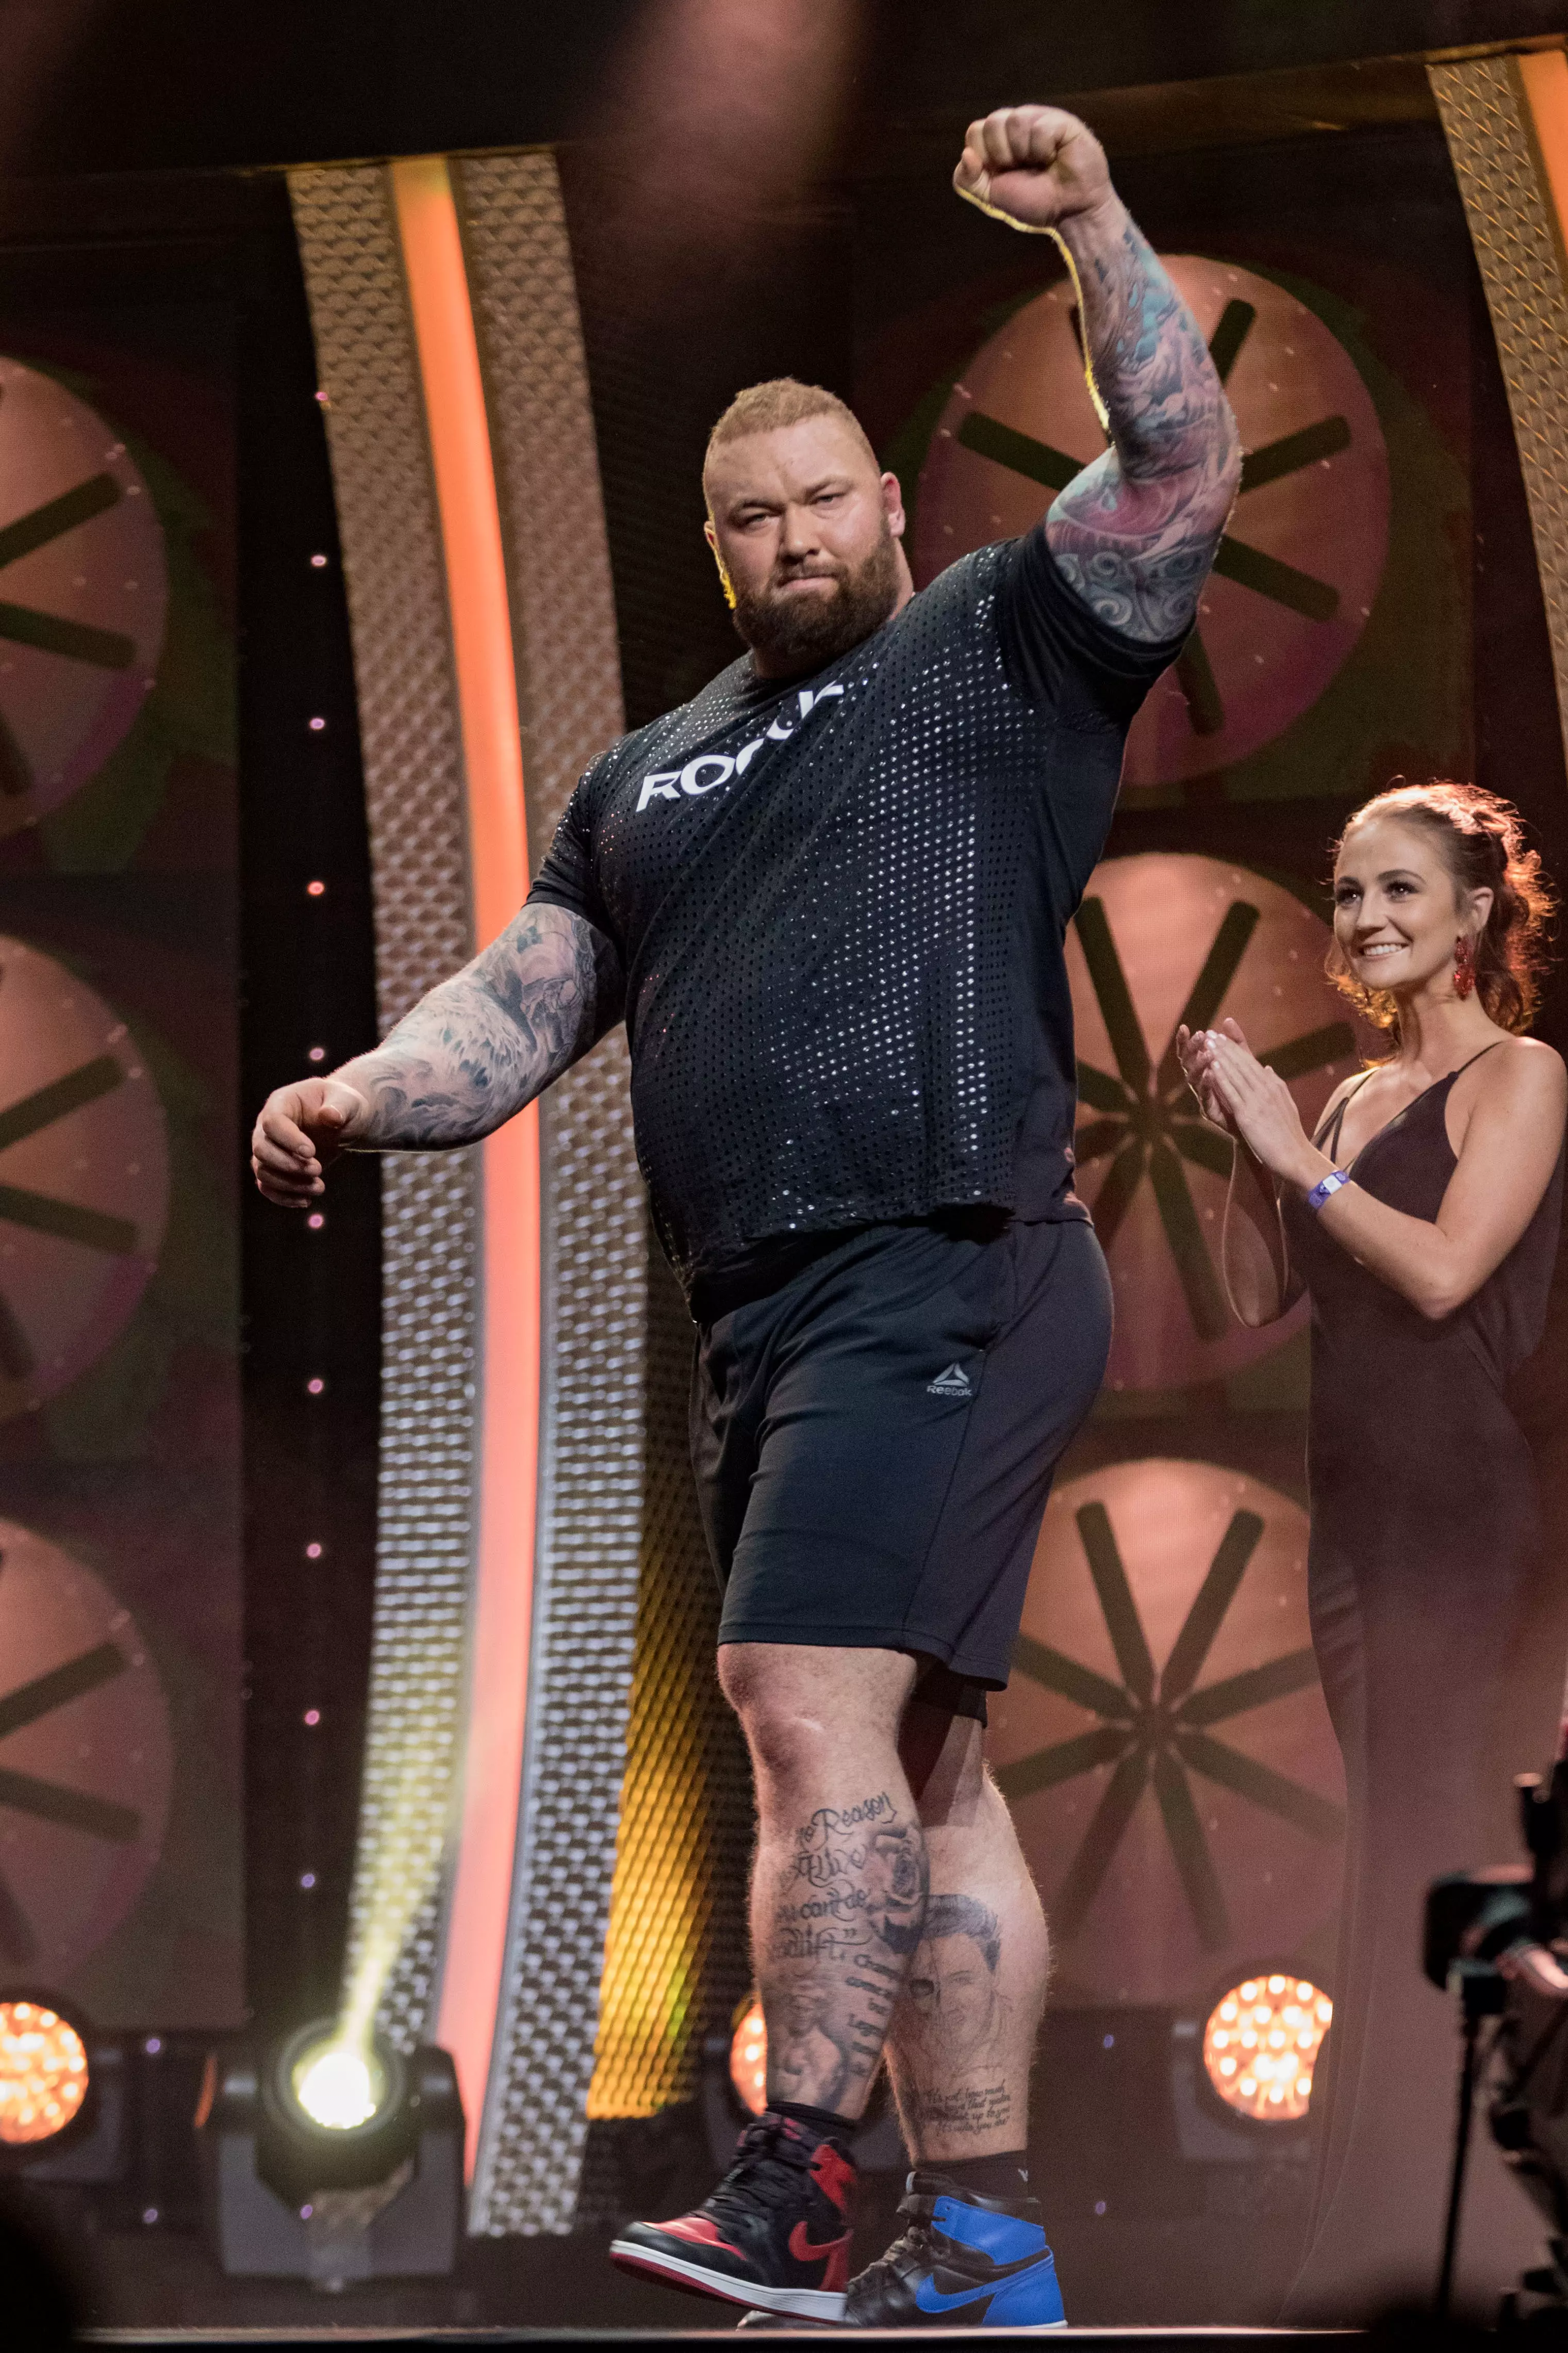 The strongman claimed the tile after dead-lifting a ton.